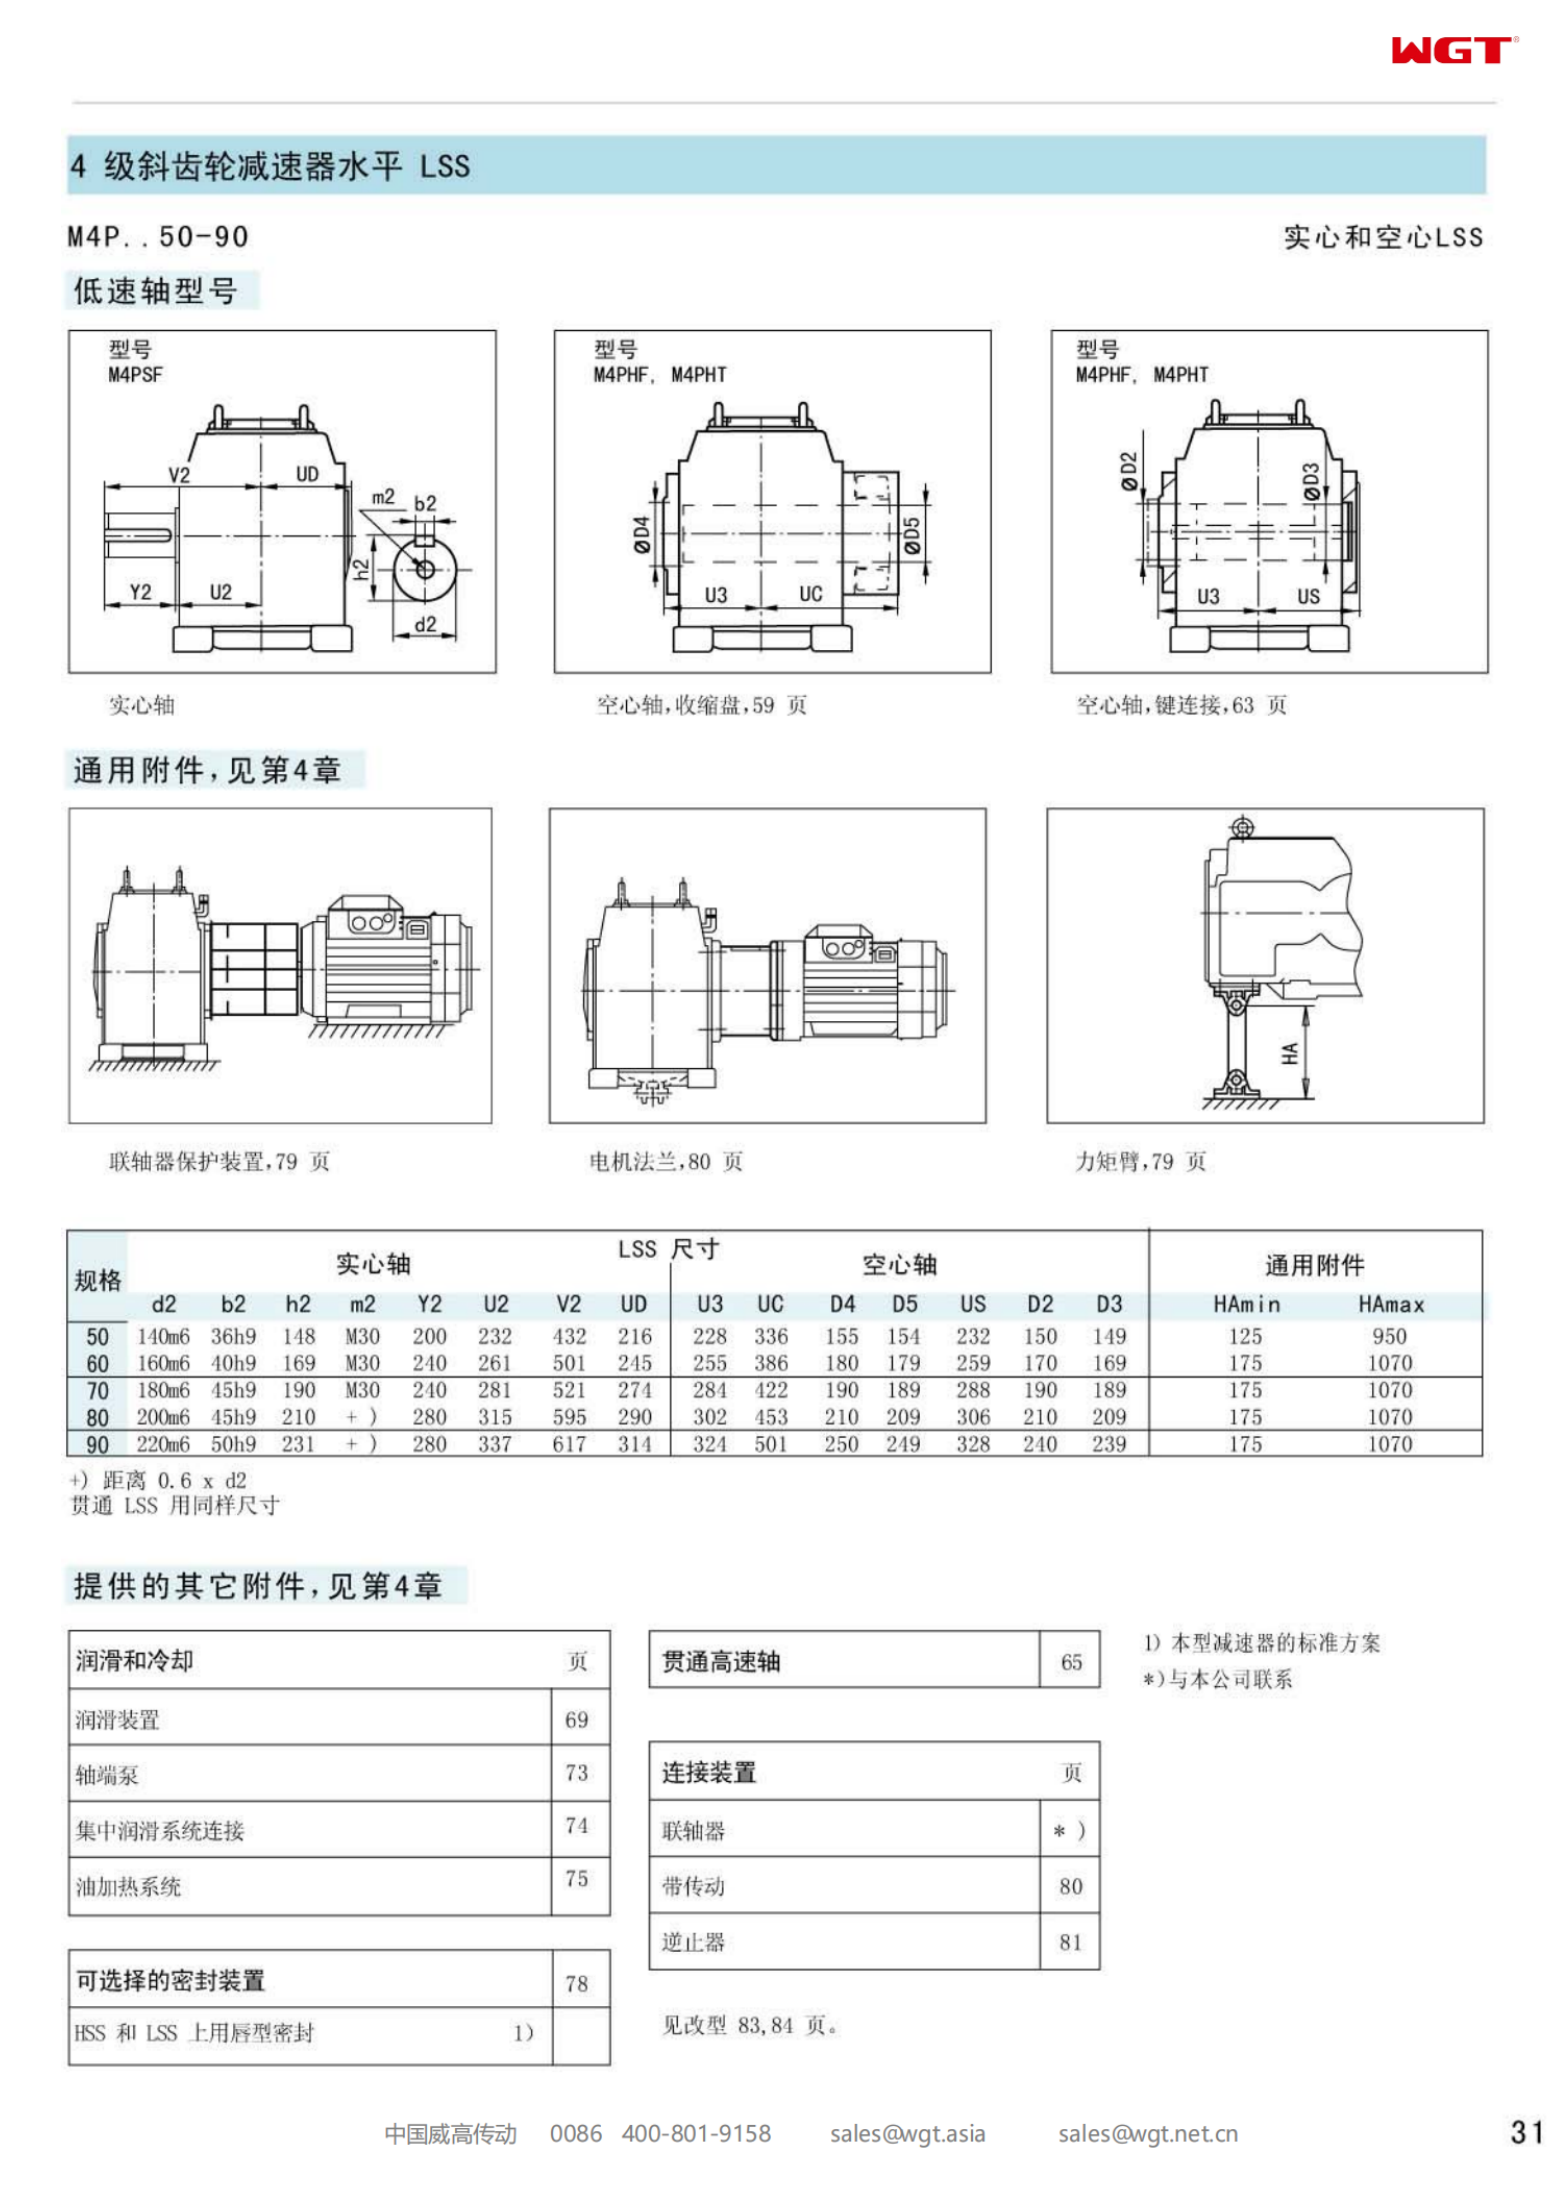 M4PHF60 Replace_SEW_M_Series Gearbox